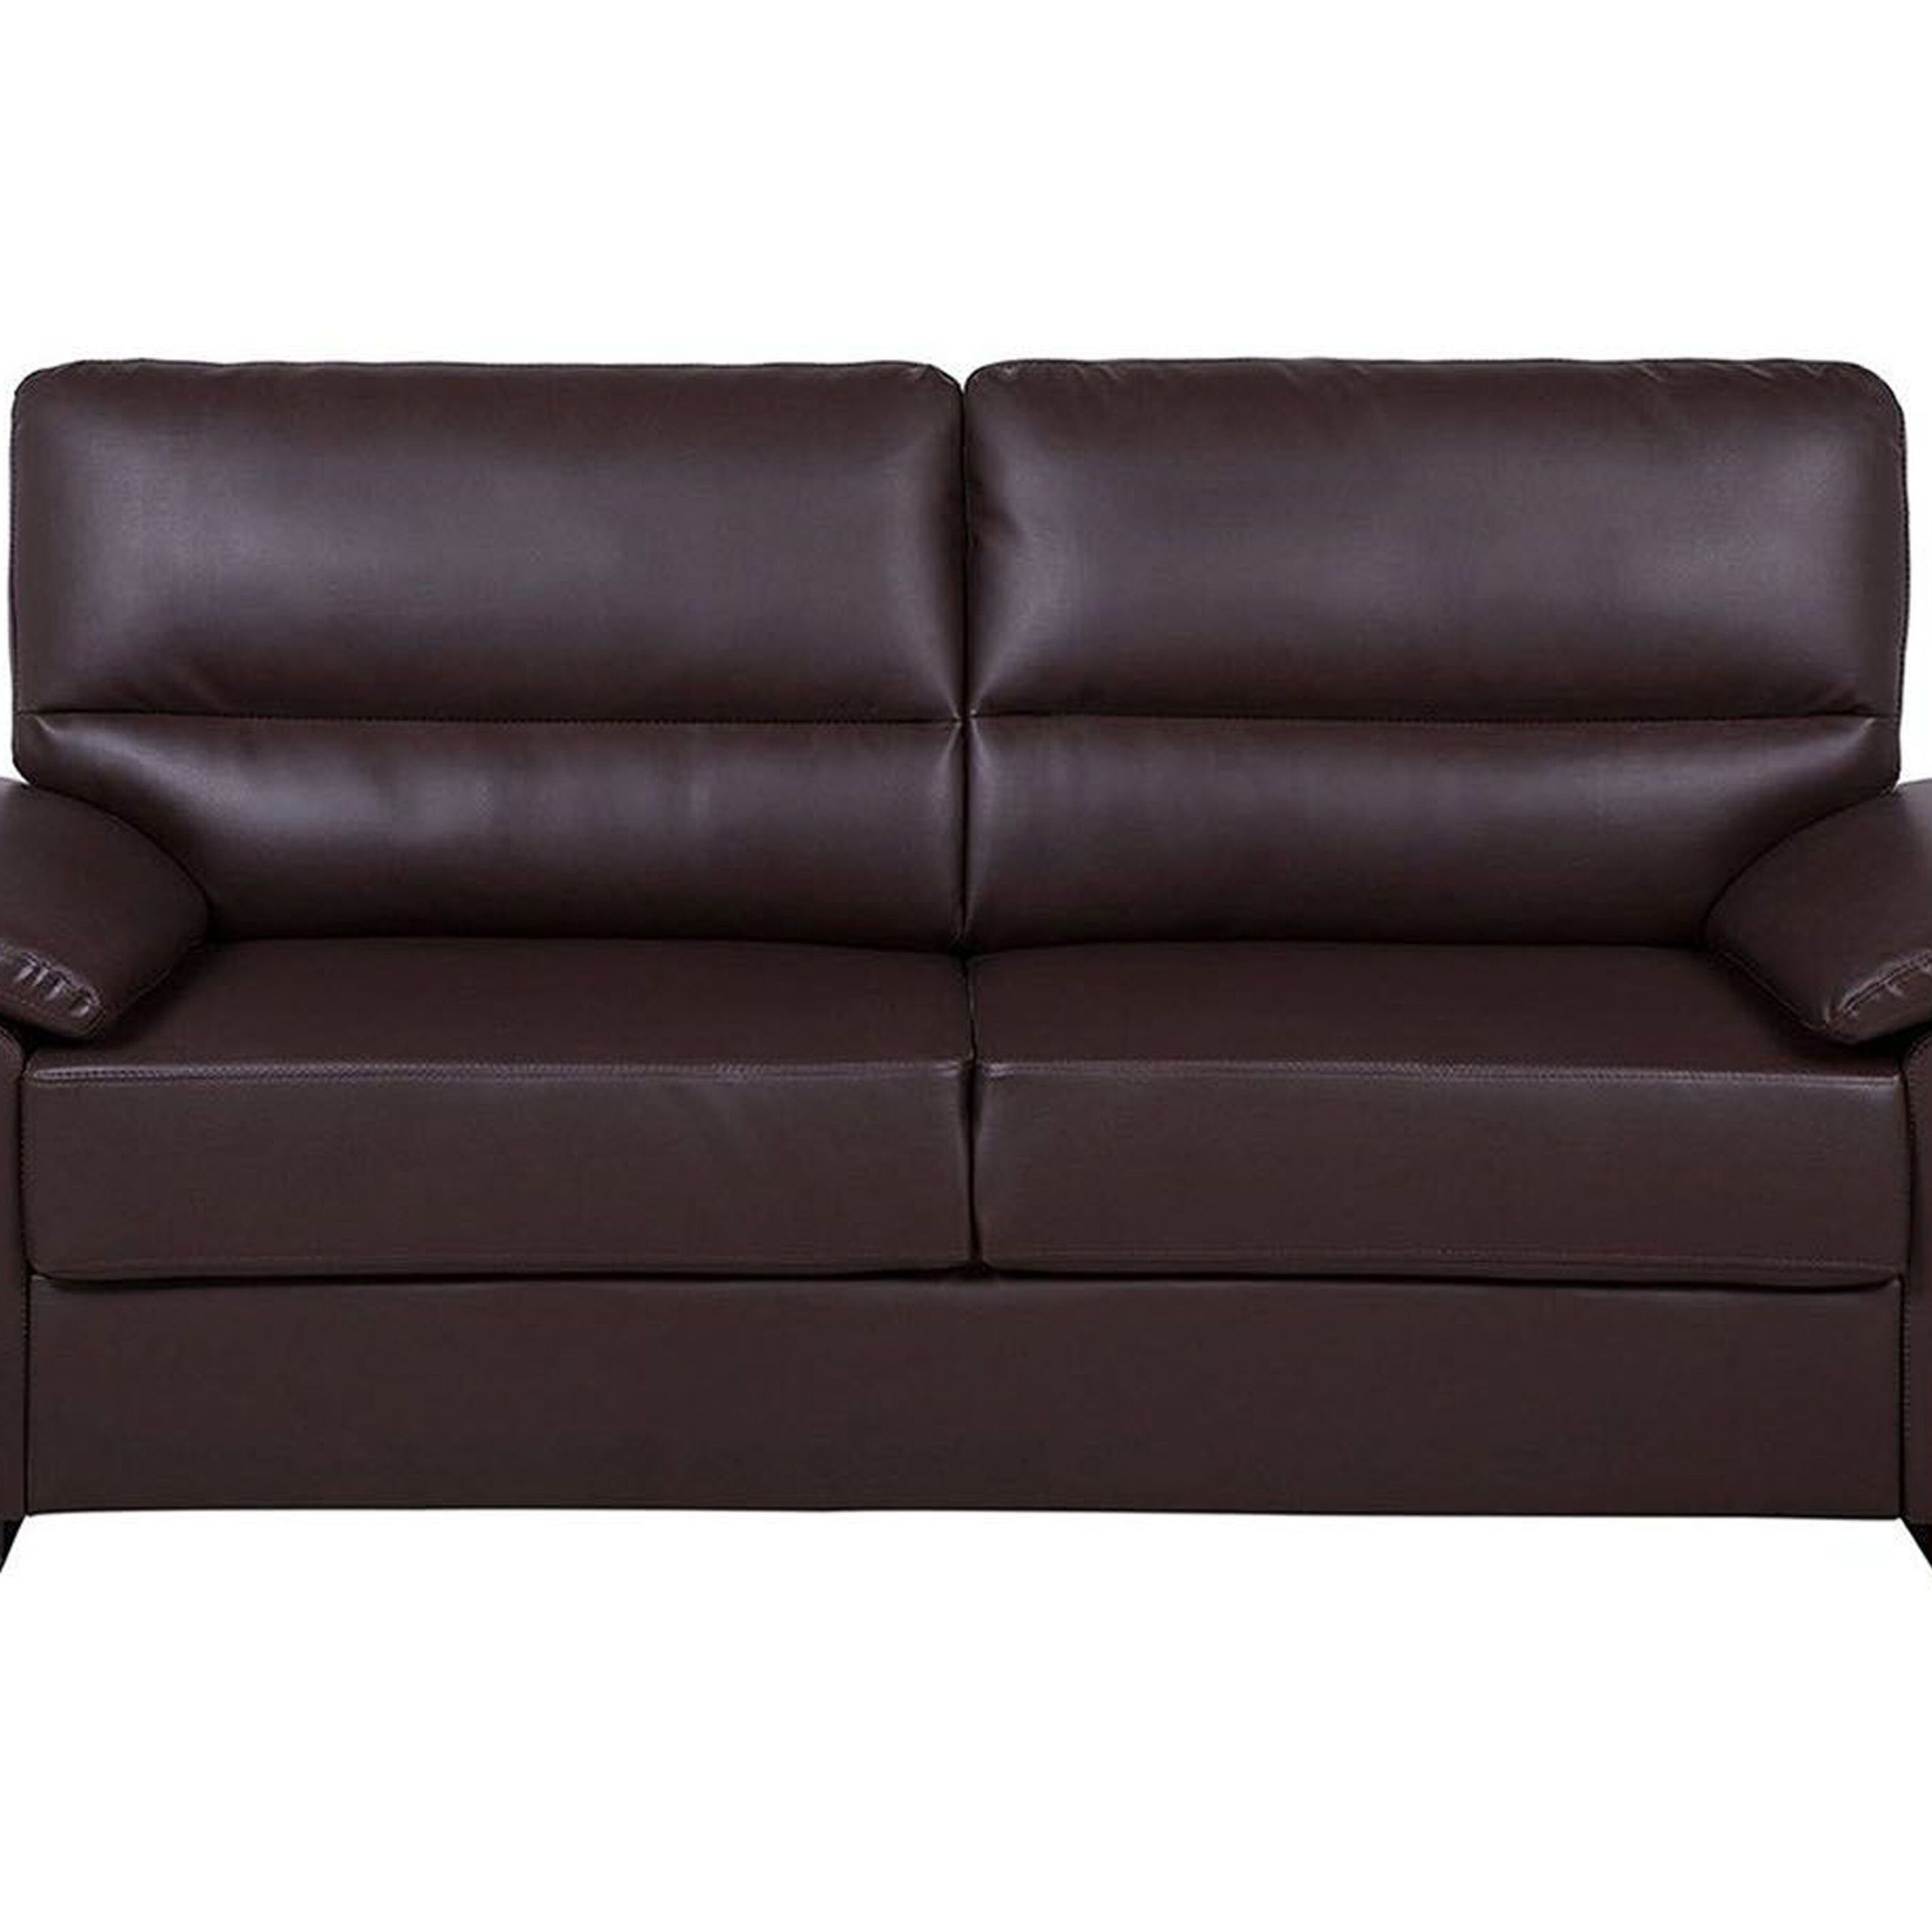 3 Seater Faux Leather Sofa Brown Vogar | Beliani.co (View 15 of 20)